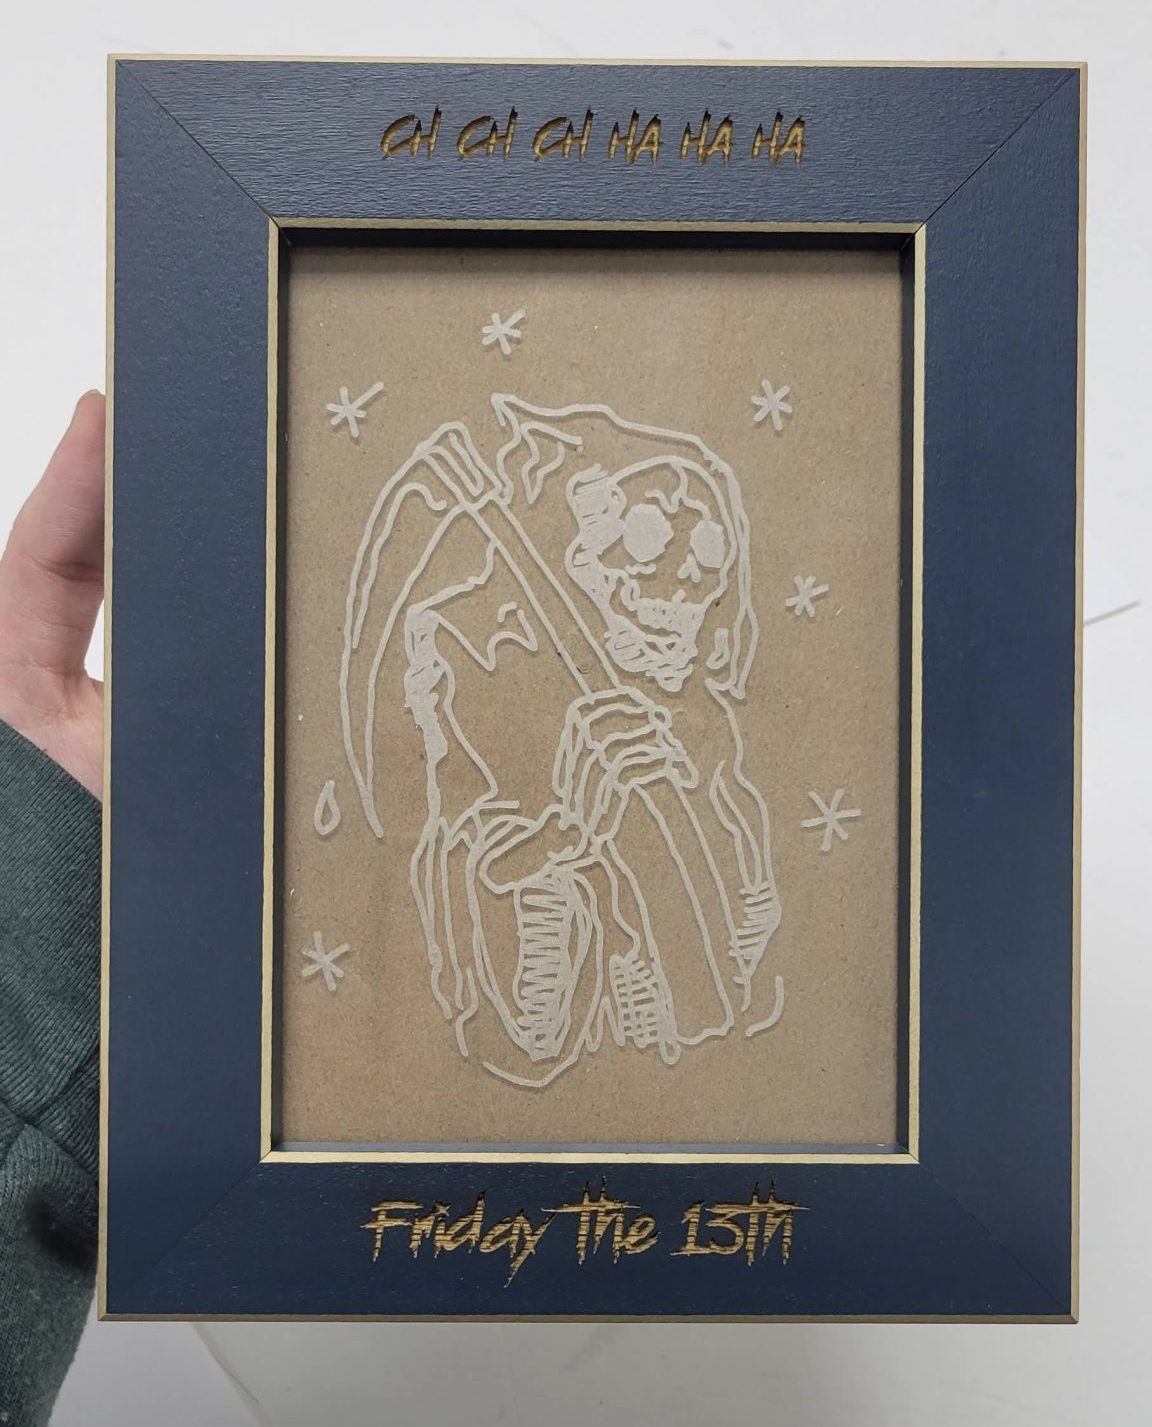 Friday the 13th Engraved Frame